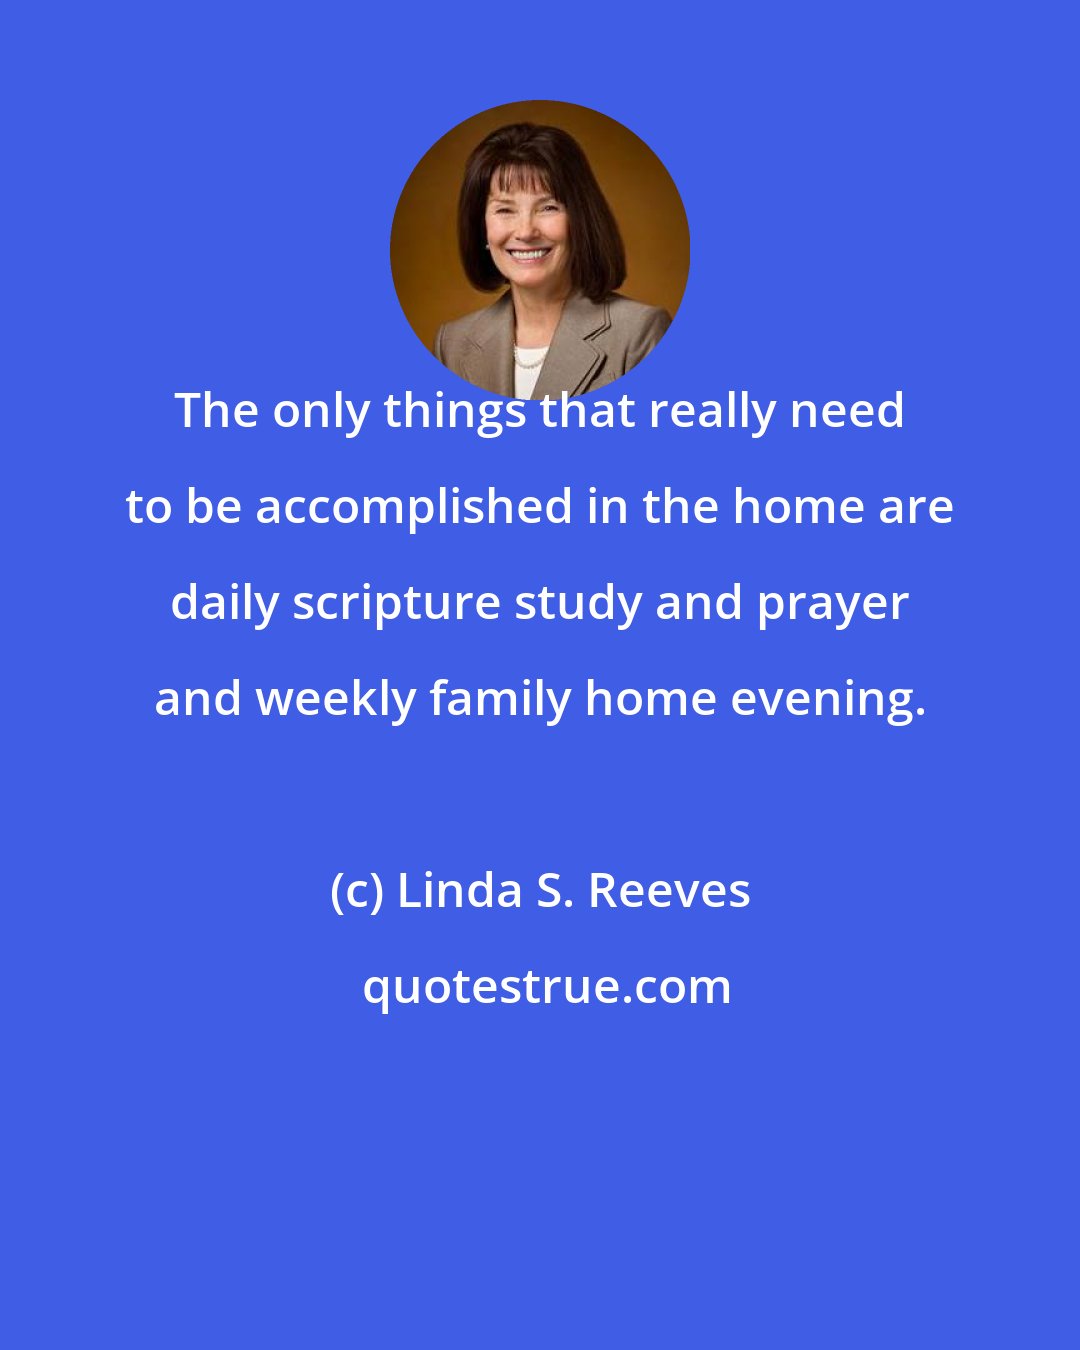 Linda S. Reeves: The only things that really need to be accomplished in the home are daily scripture study and prayer and weekly family home evening.